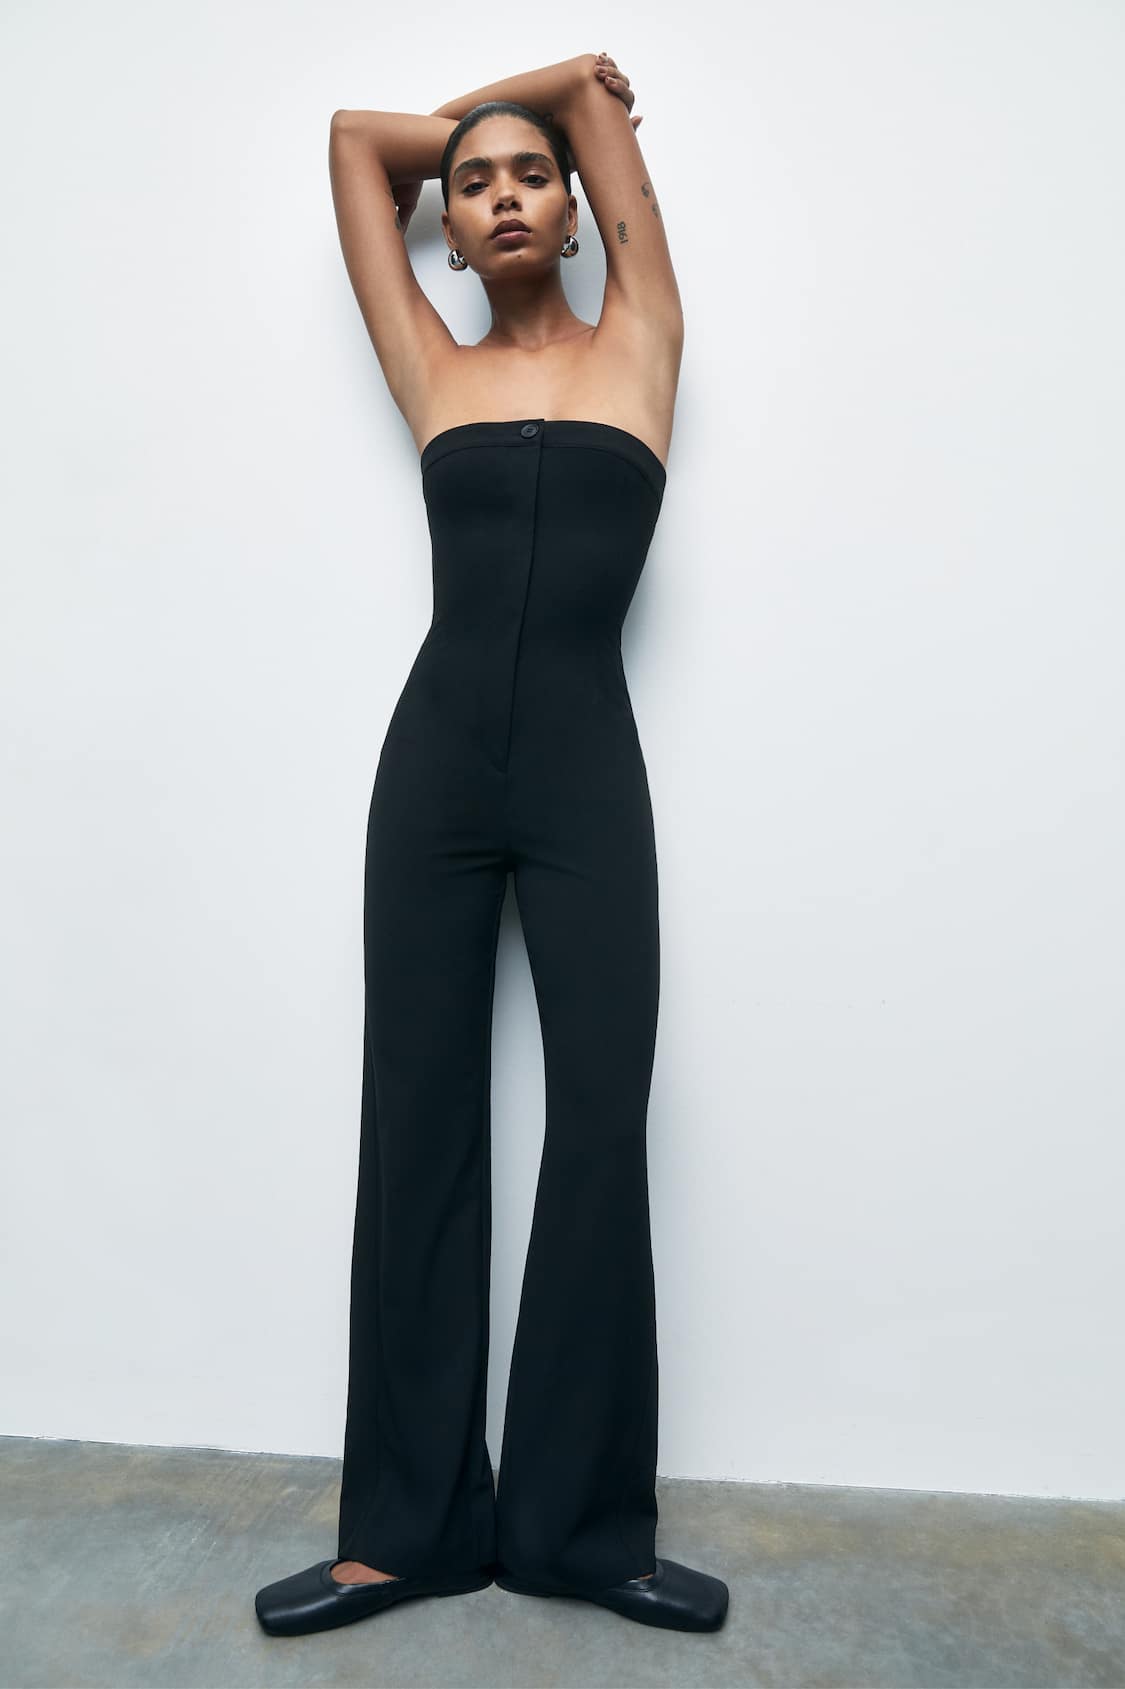 Dungarees & jumpsuits - Clothing - Woman - PULL&BEAR Montenegro